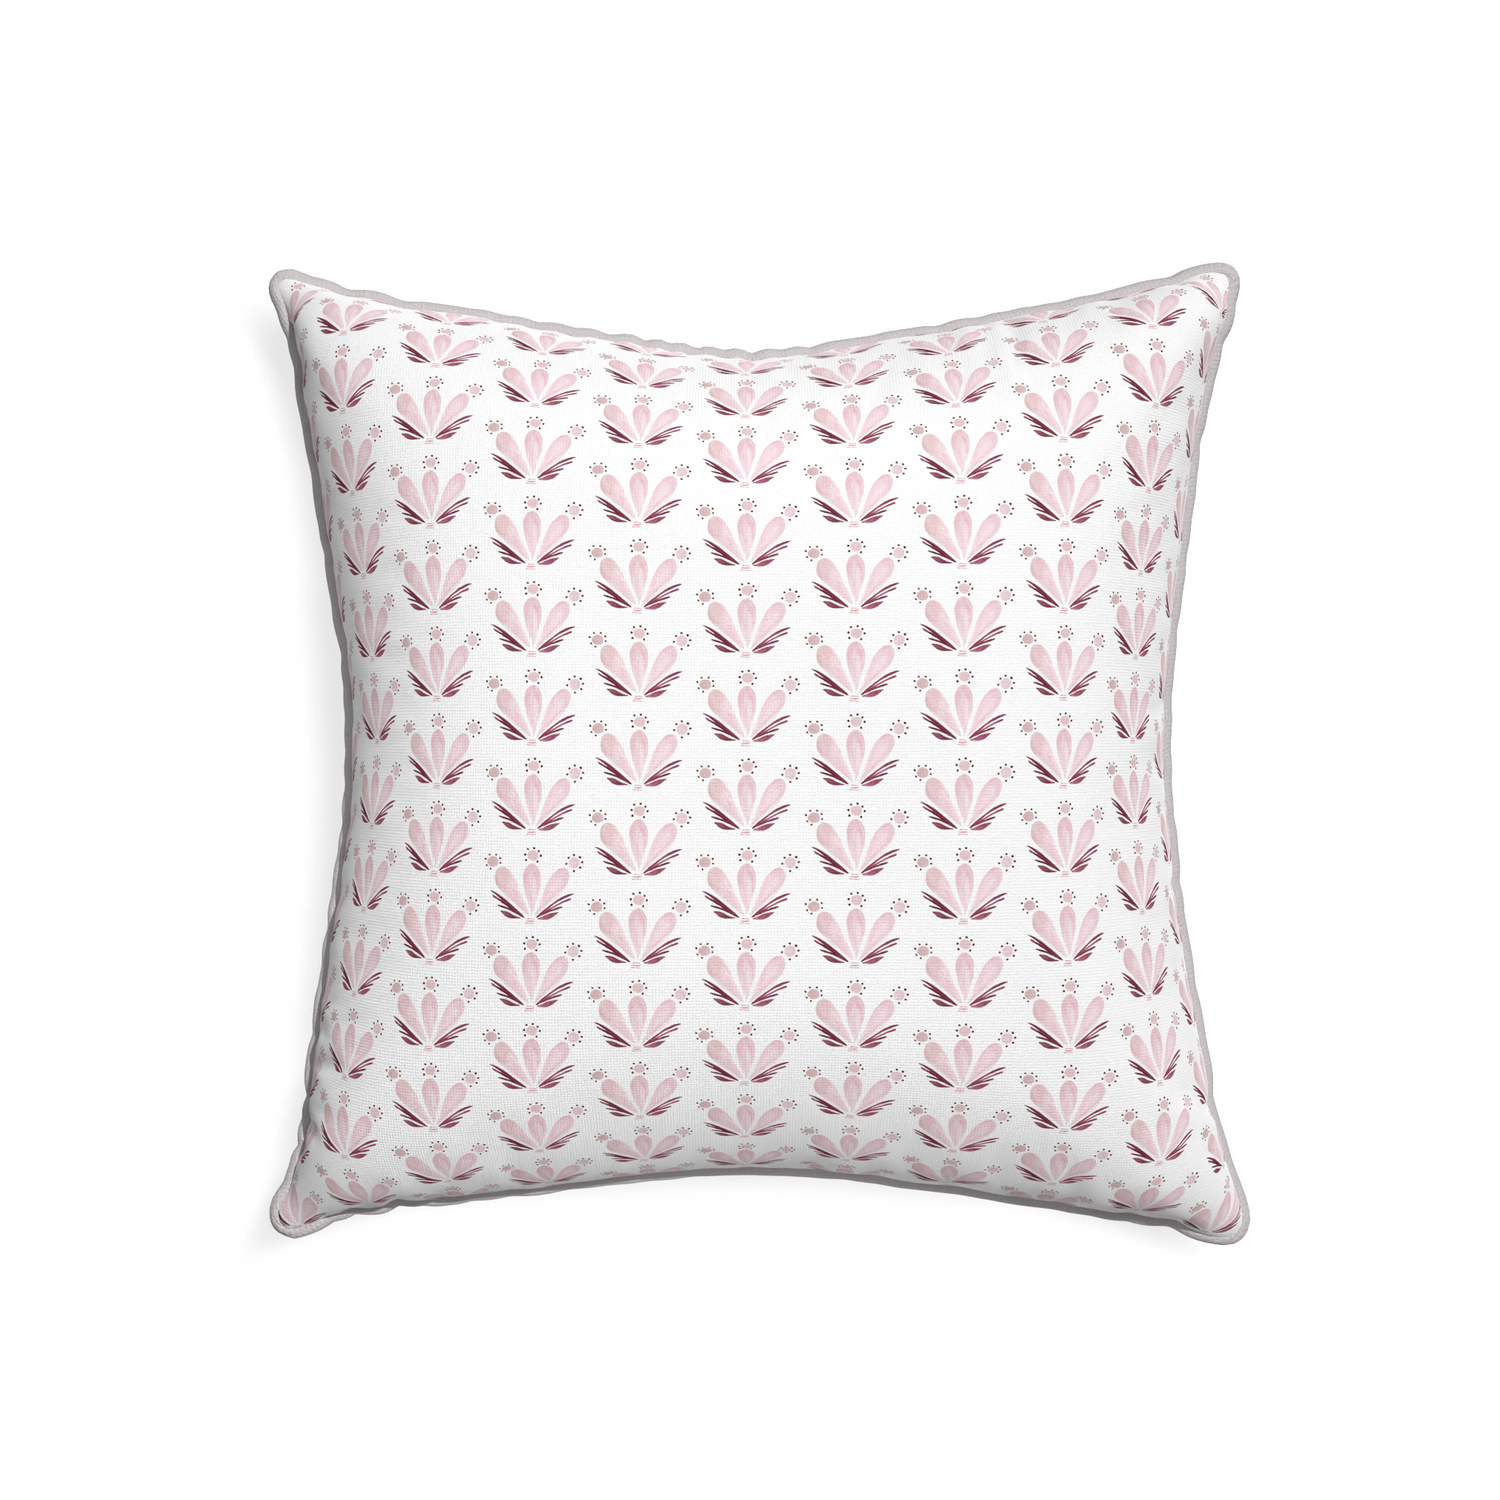 22-square serena pink custom pink & burgundy drop repeat floralpillow with pebble piping on white background